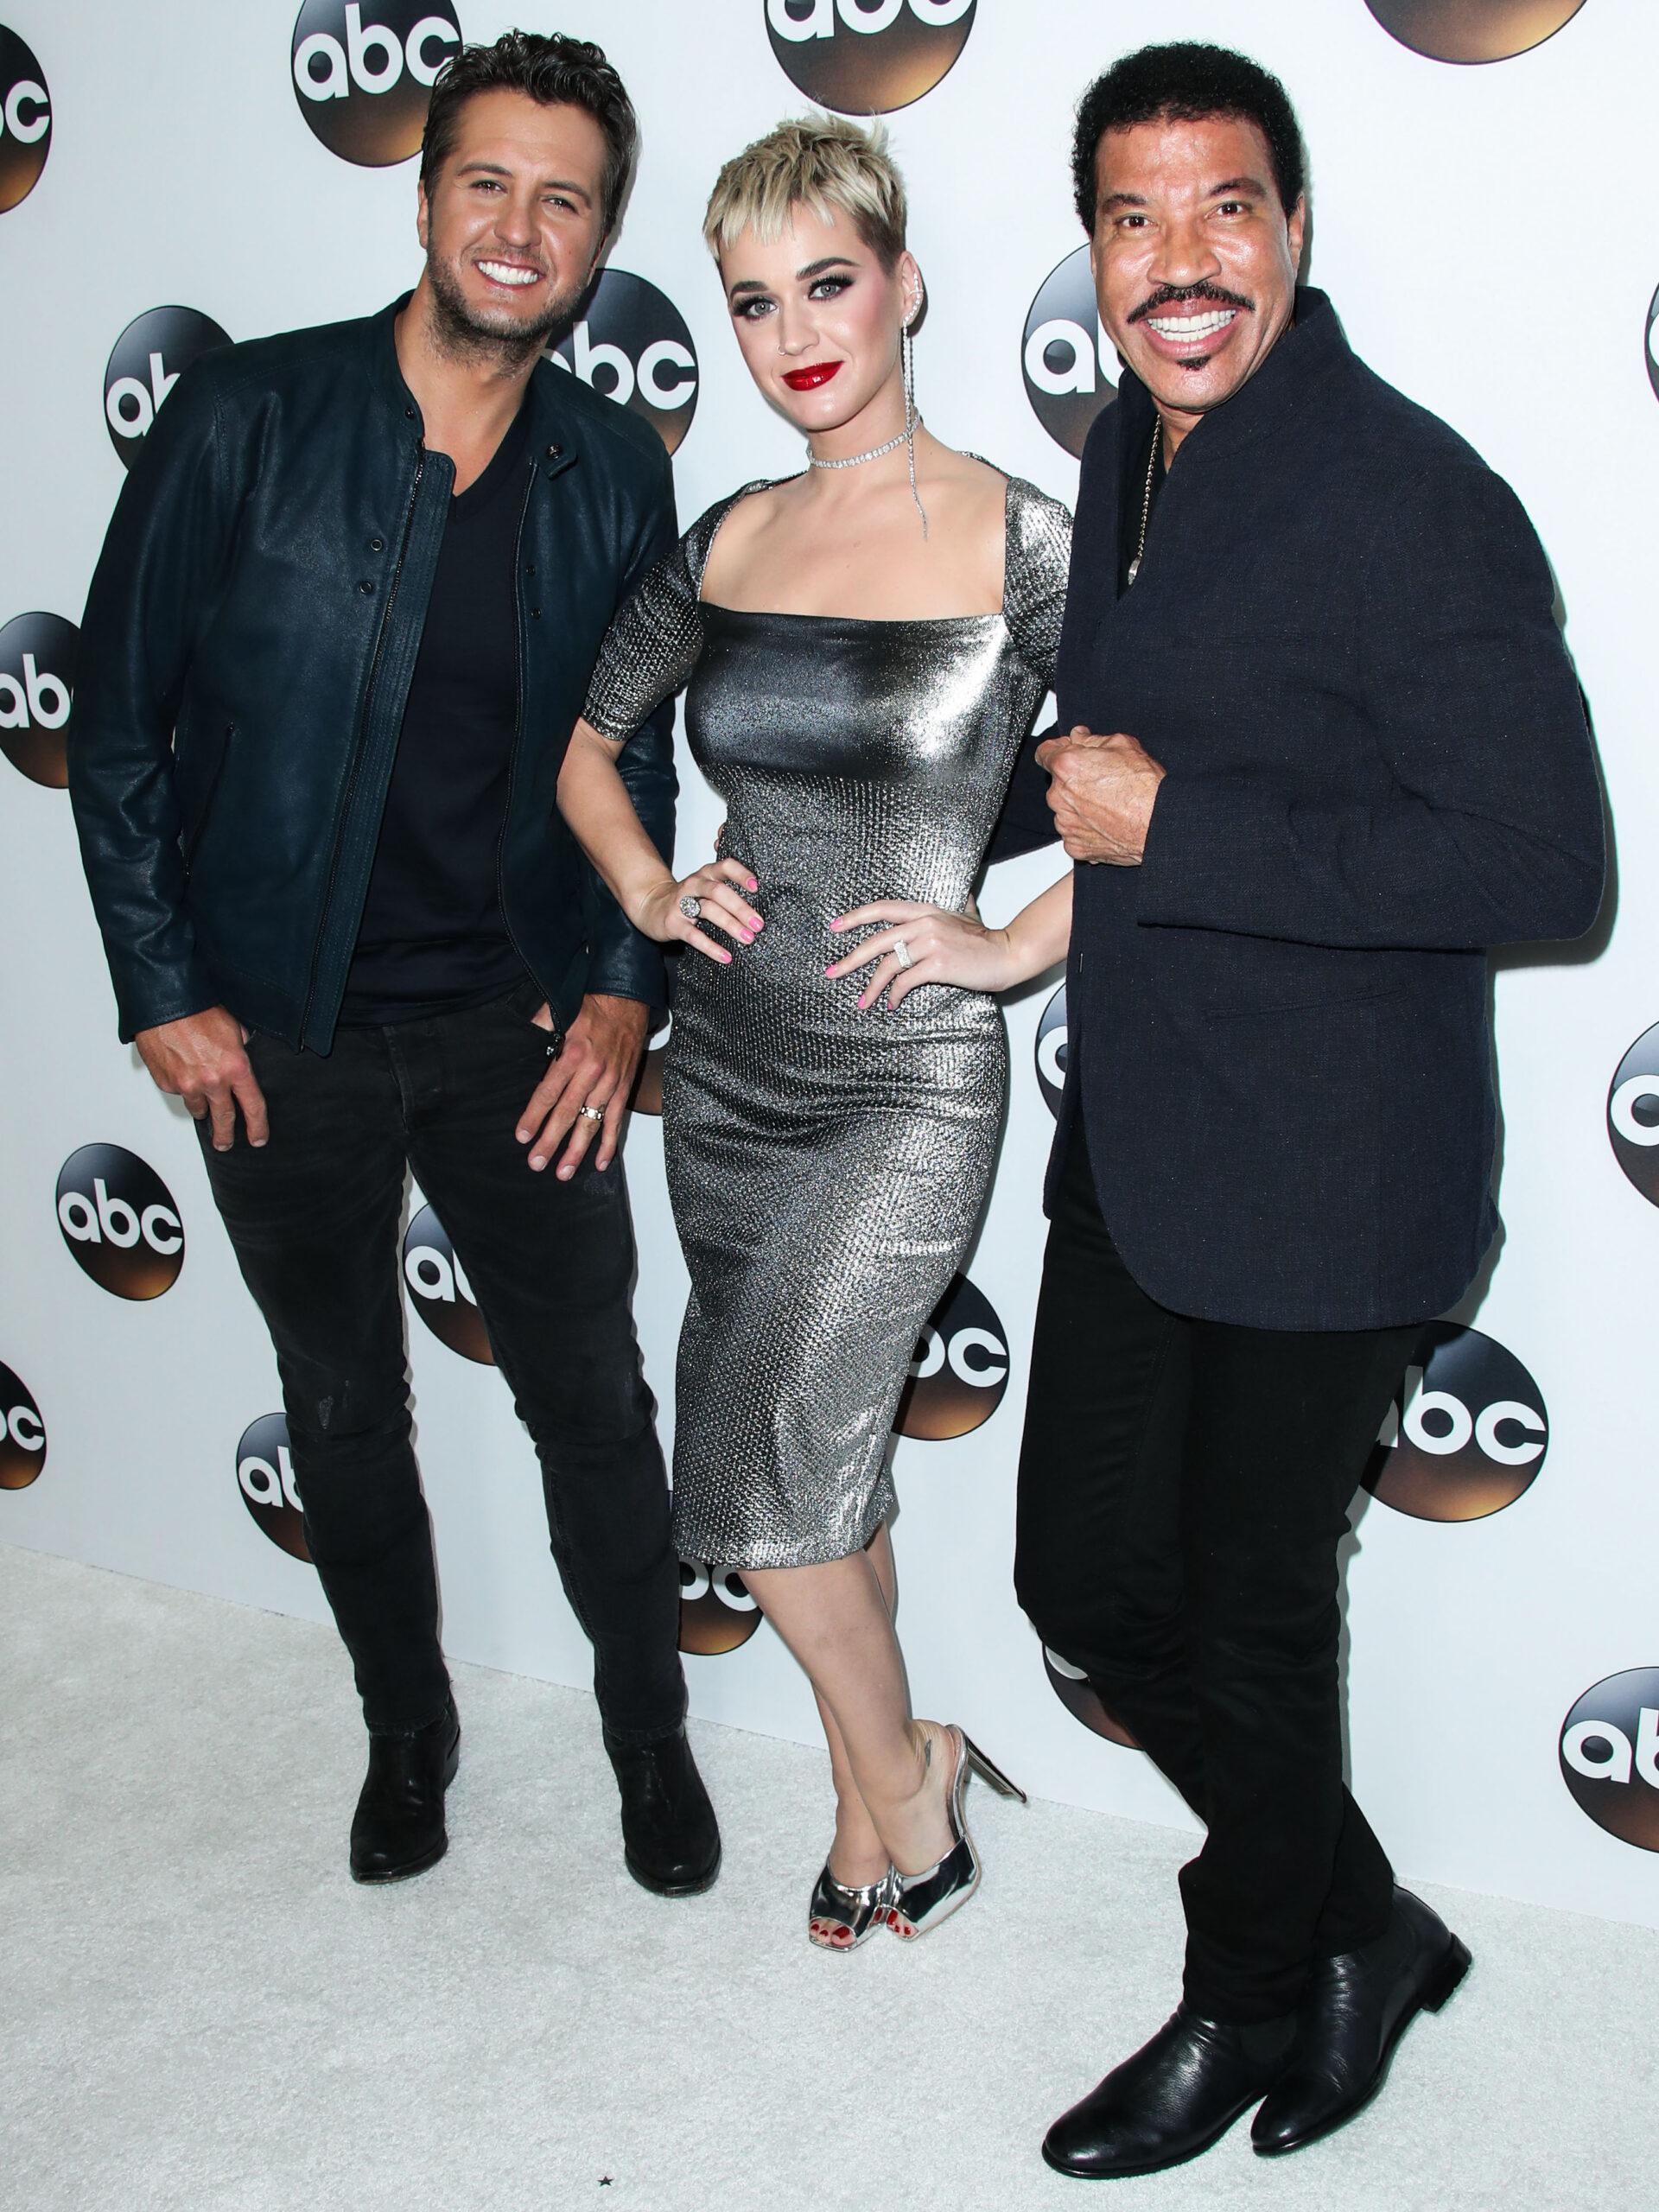 Katy Perry, Luke Bryan, and Lionel Richie posing at ABC carpet